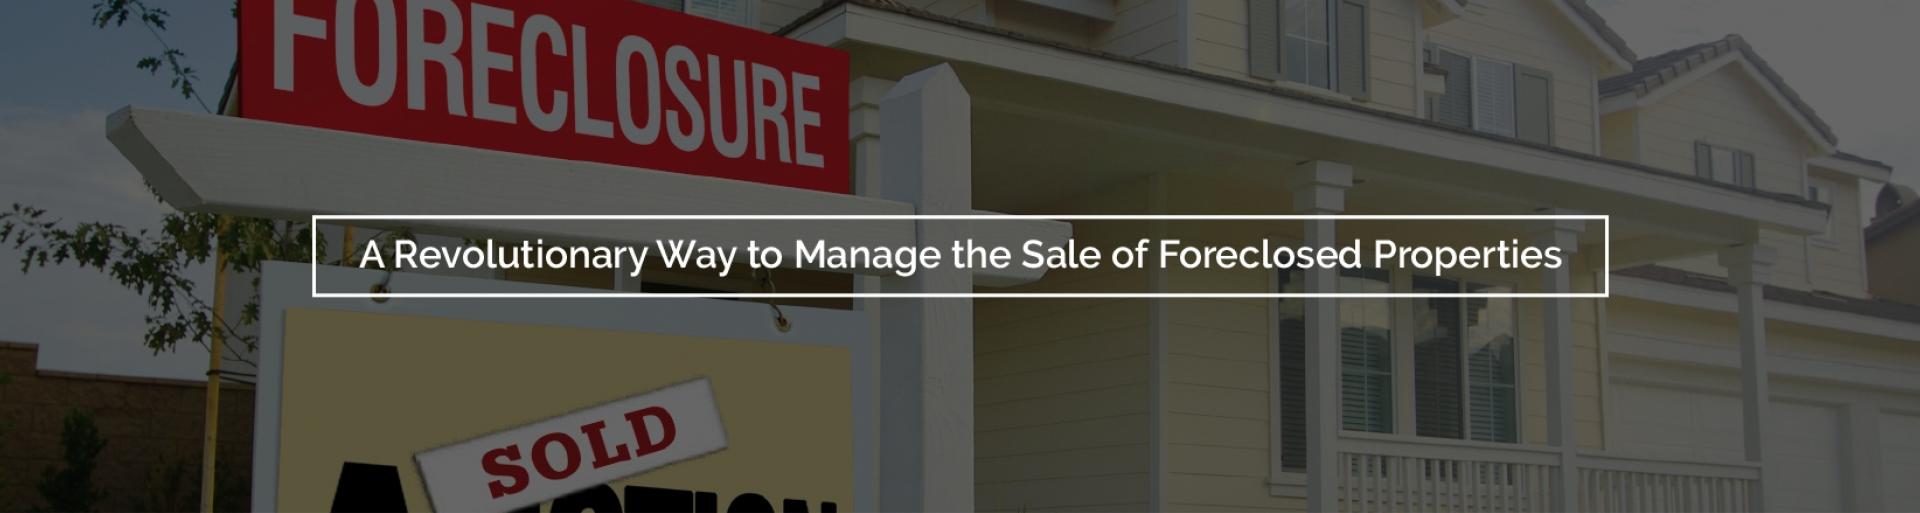 A Revolutionary Way to Manage the Sale of Foreclosed Properties